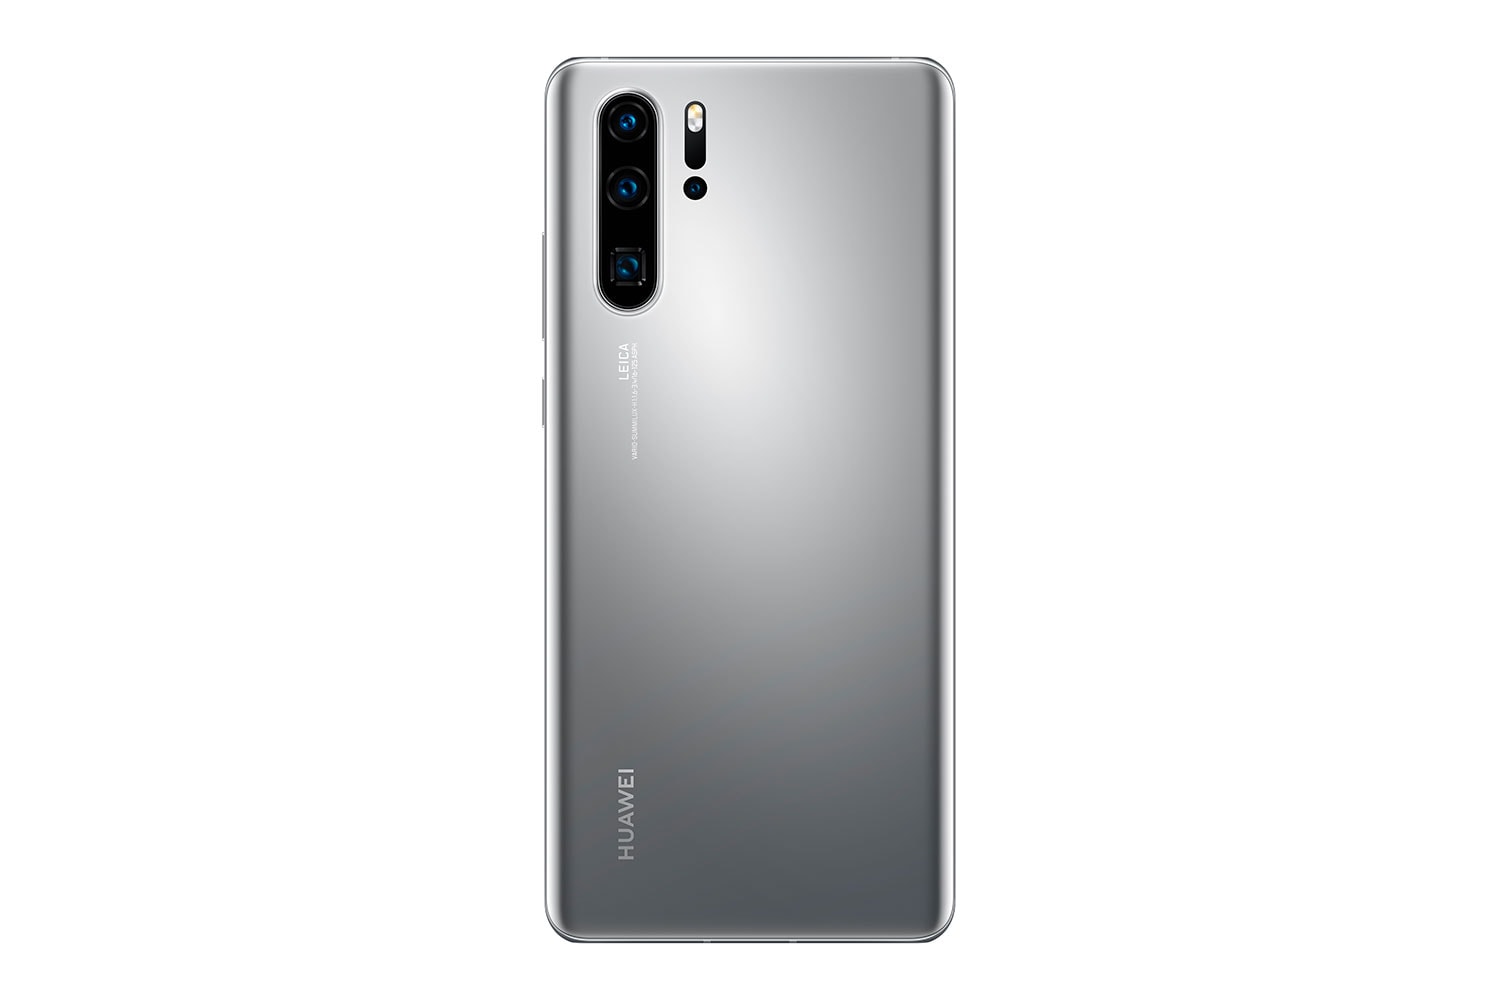 https://www.androidworld.it/wp-content/uploads/2020/05/P30-Pro-N.E-silver-11.jpg